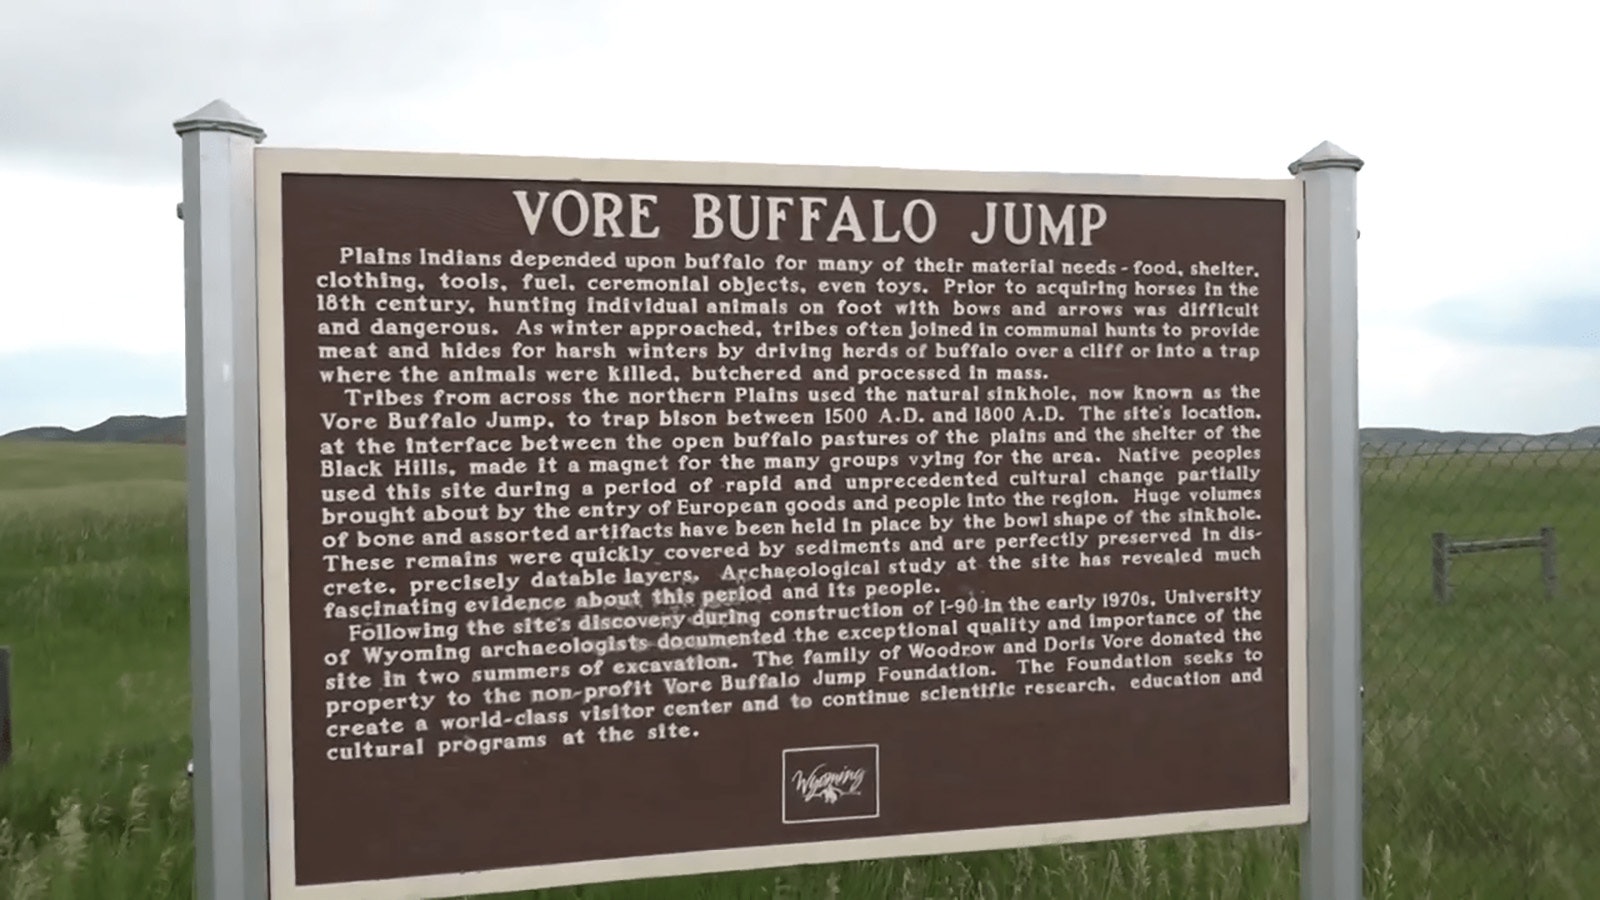 A sign at the Vore Buffalo Jump tells visitors about the significance of the site.